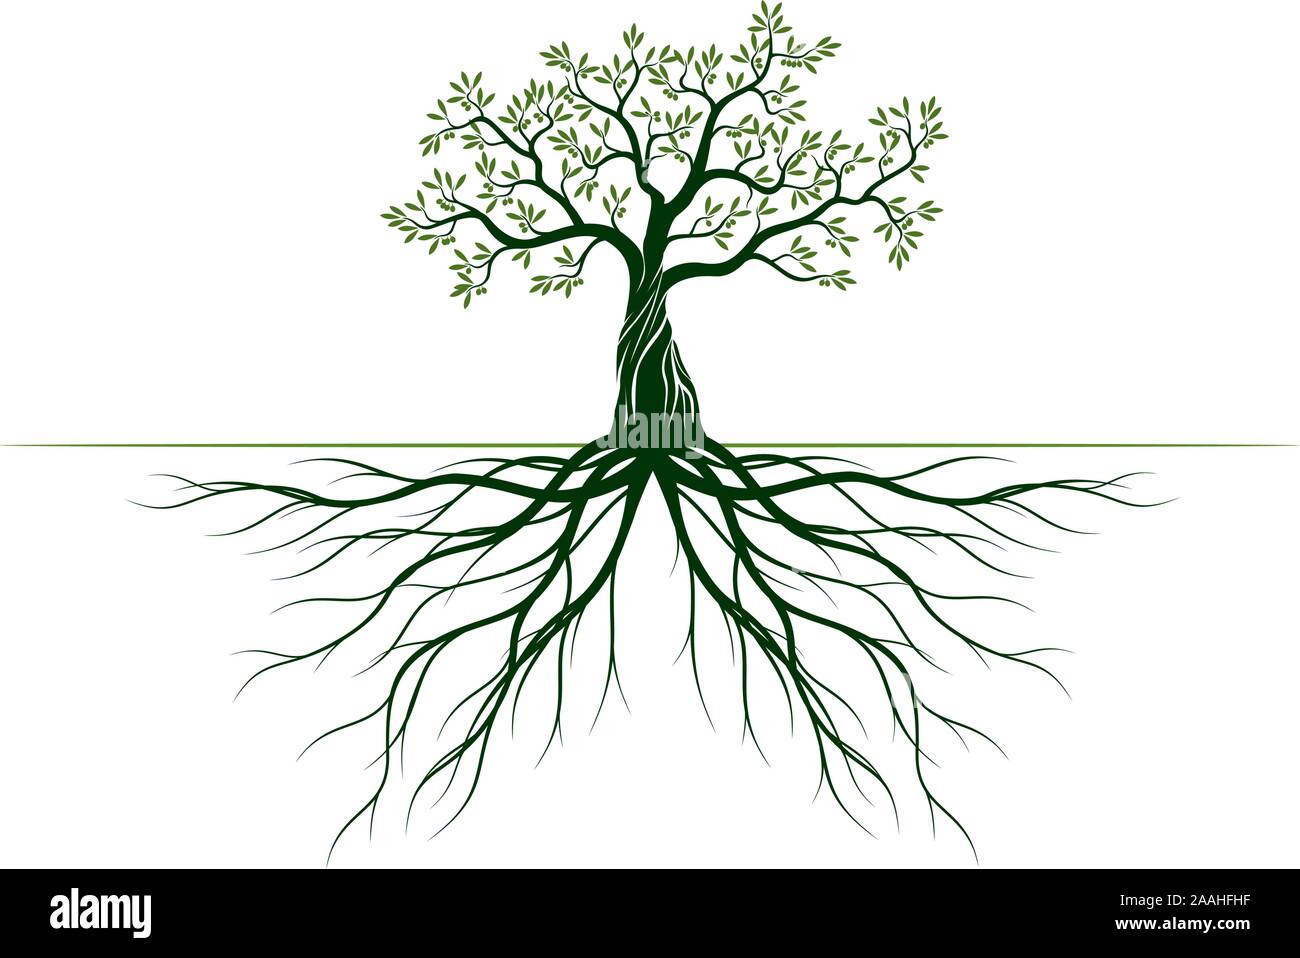 Green Olive Tree With Leaves And Roots Vector Outline